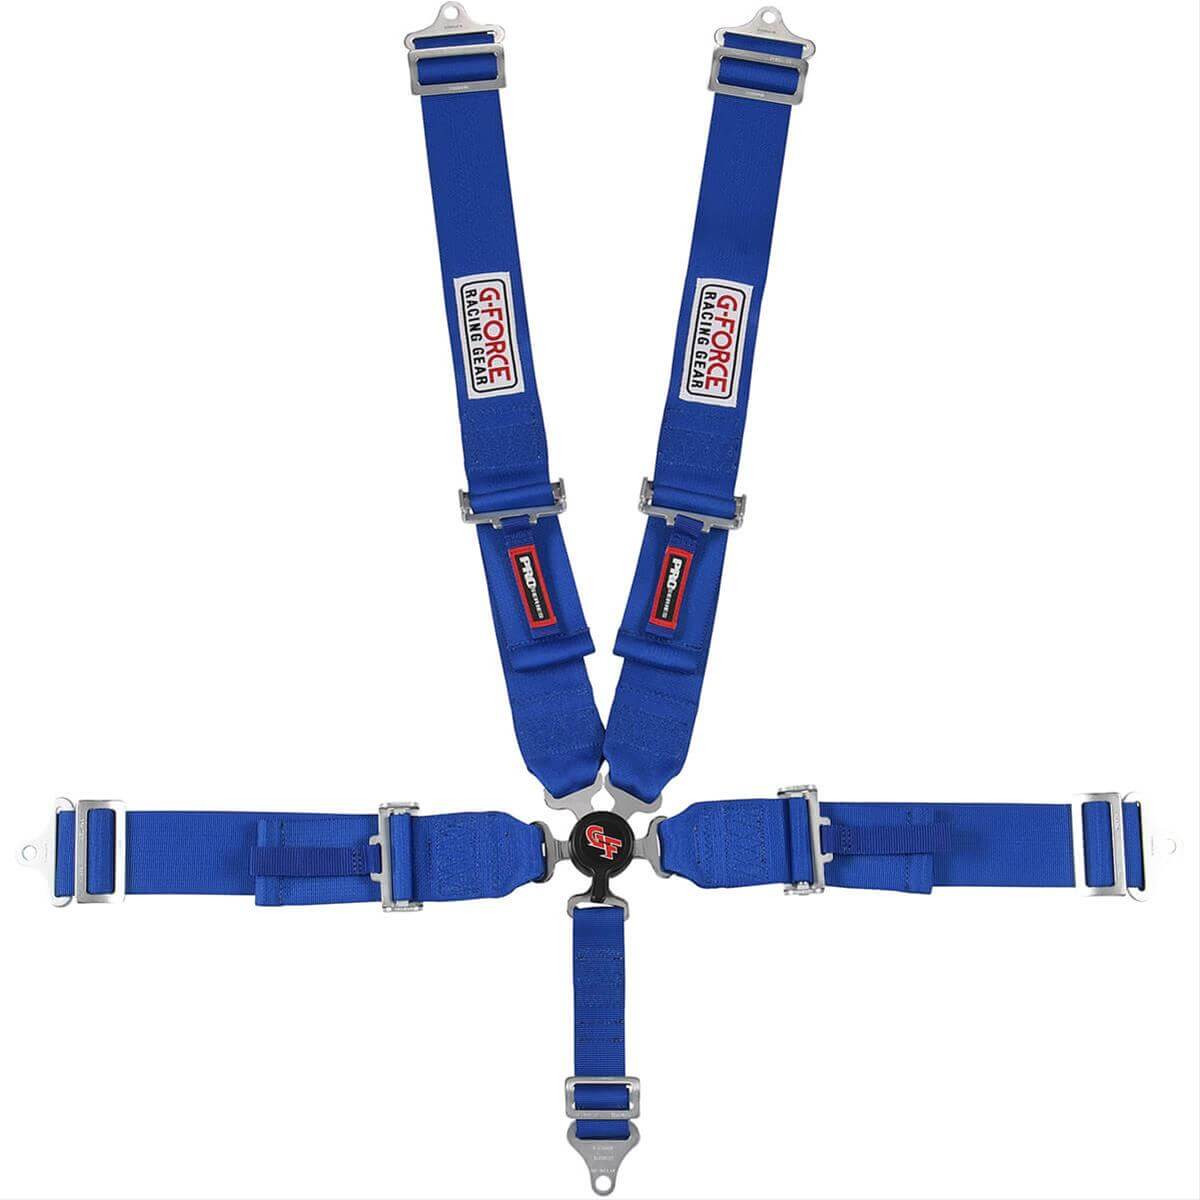 5-Point Camlock Harness - $167.00